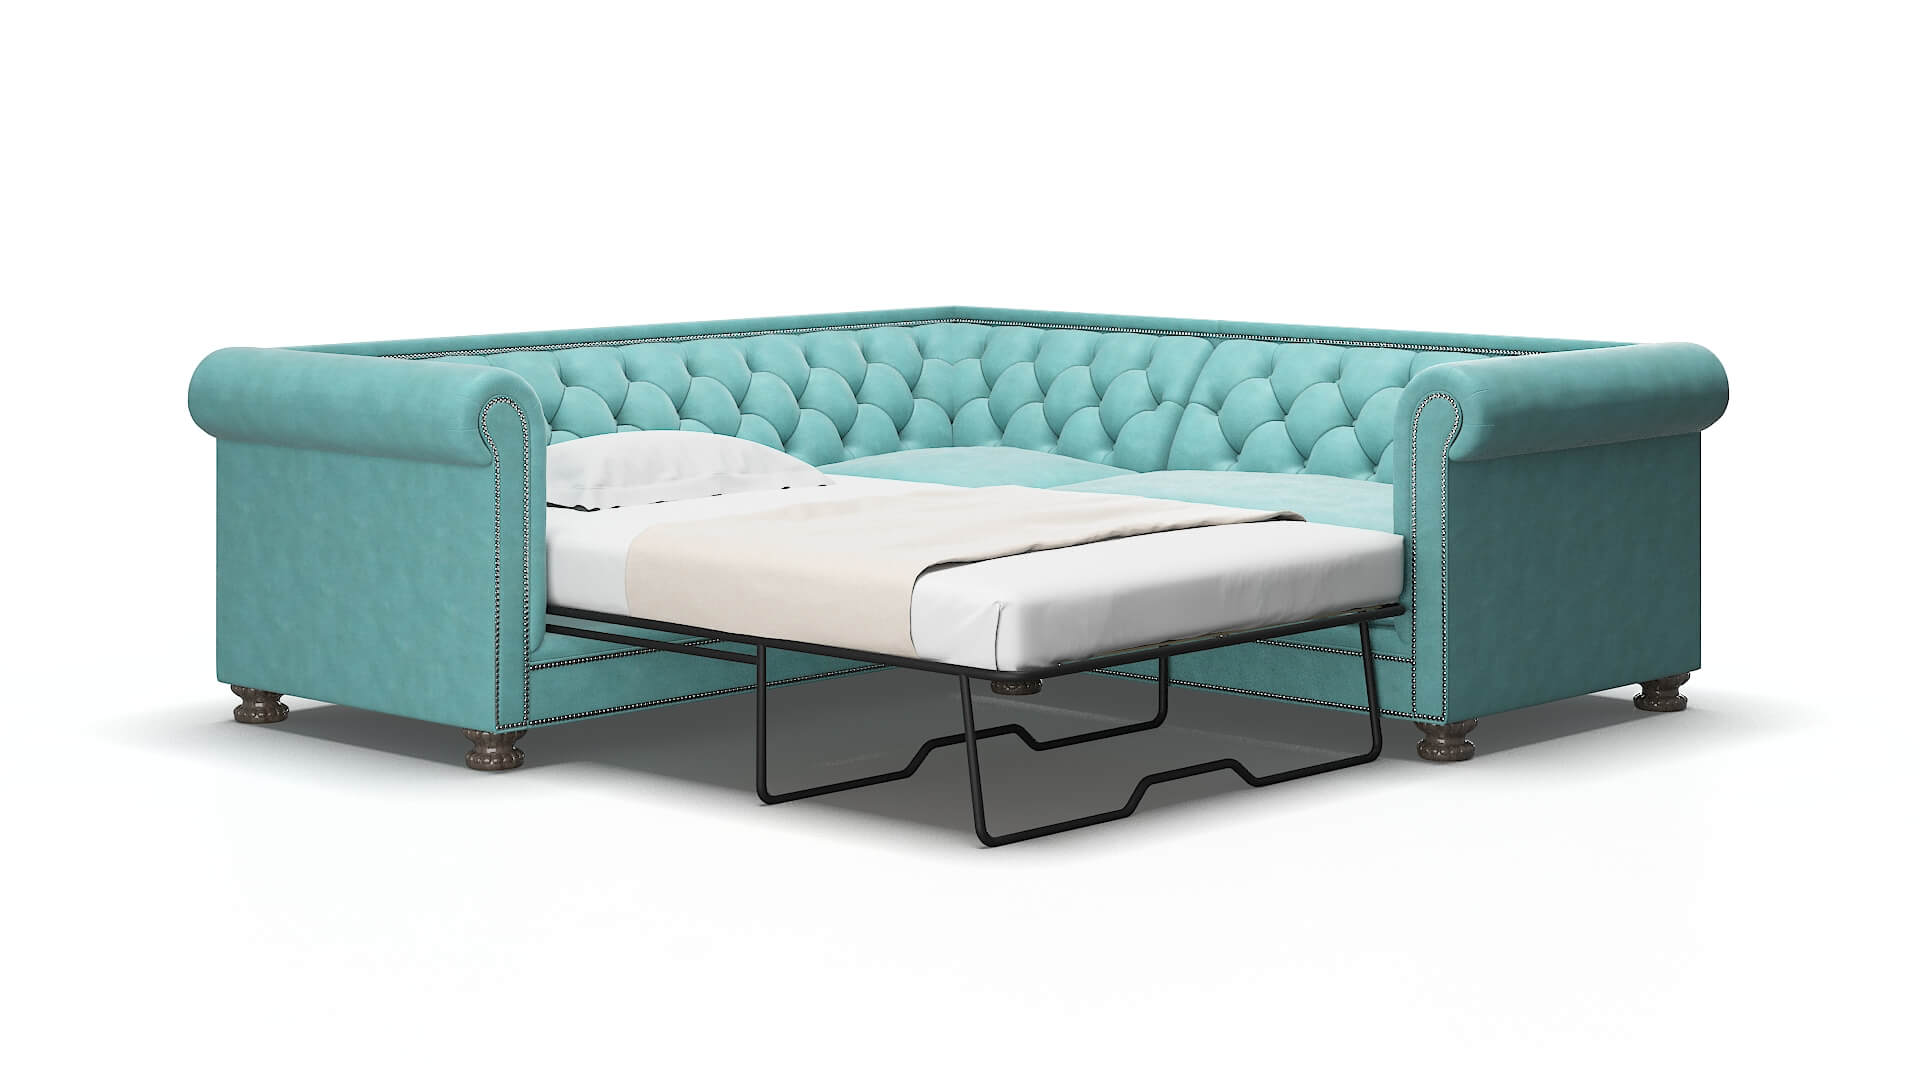 Athens Curious Turquoise Sectional Sleeper 2